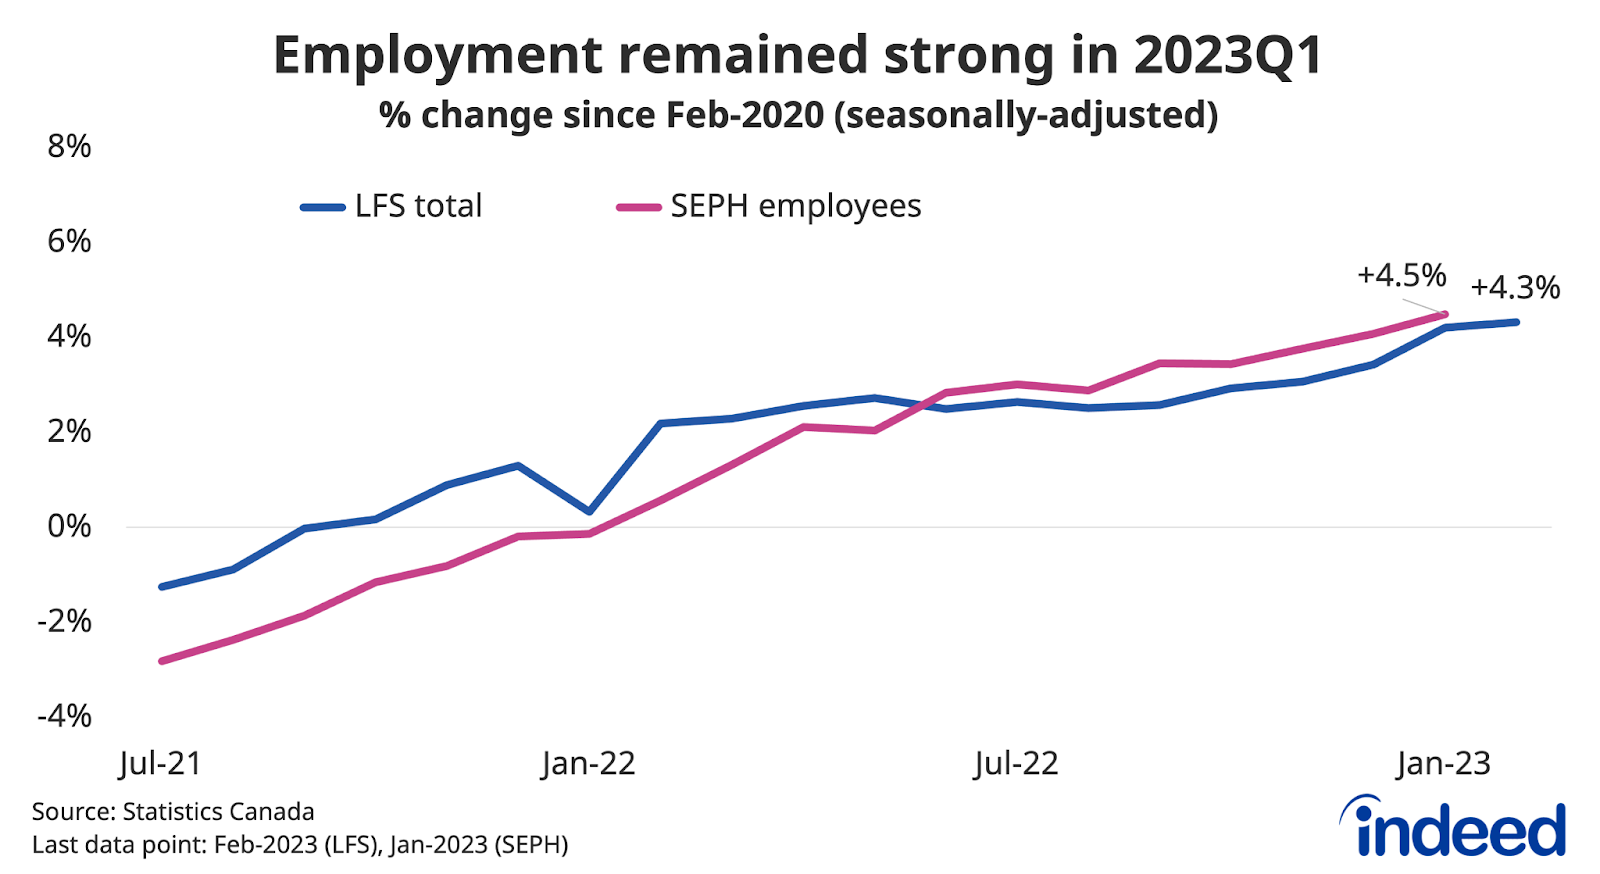 A line chart titled “Employment remained strong in 2023Q1,” shows the percent change in employment since February 2020.